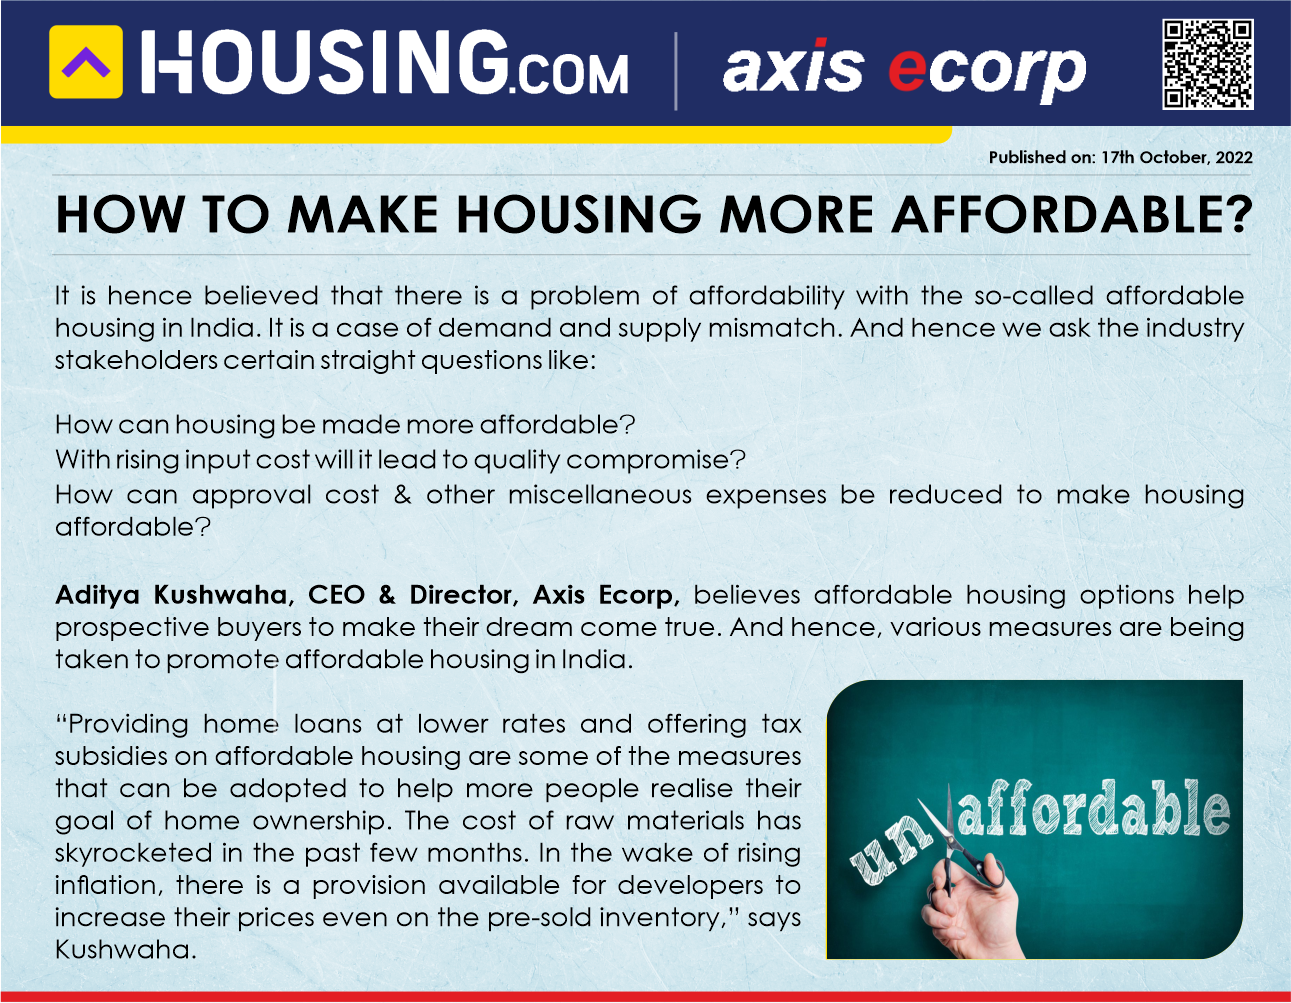 How to make housing more affordable?